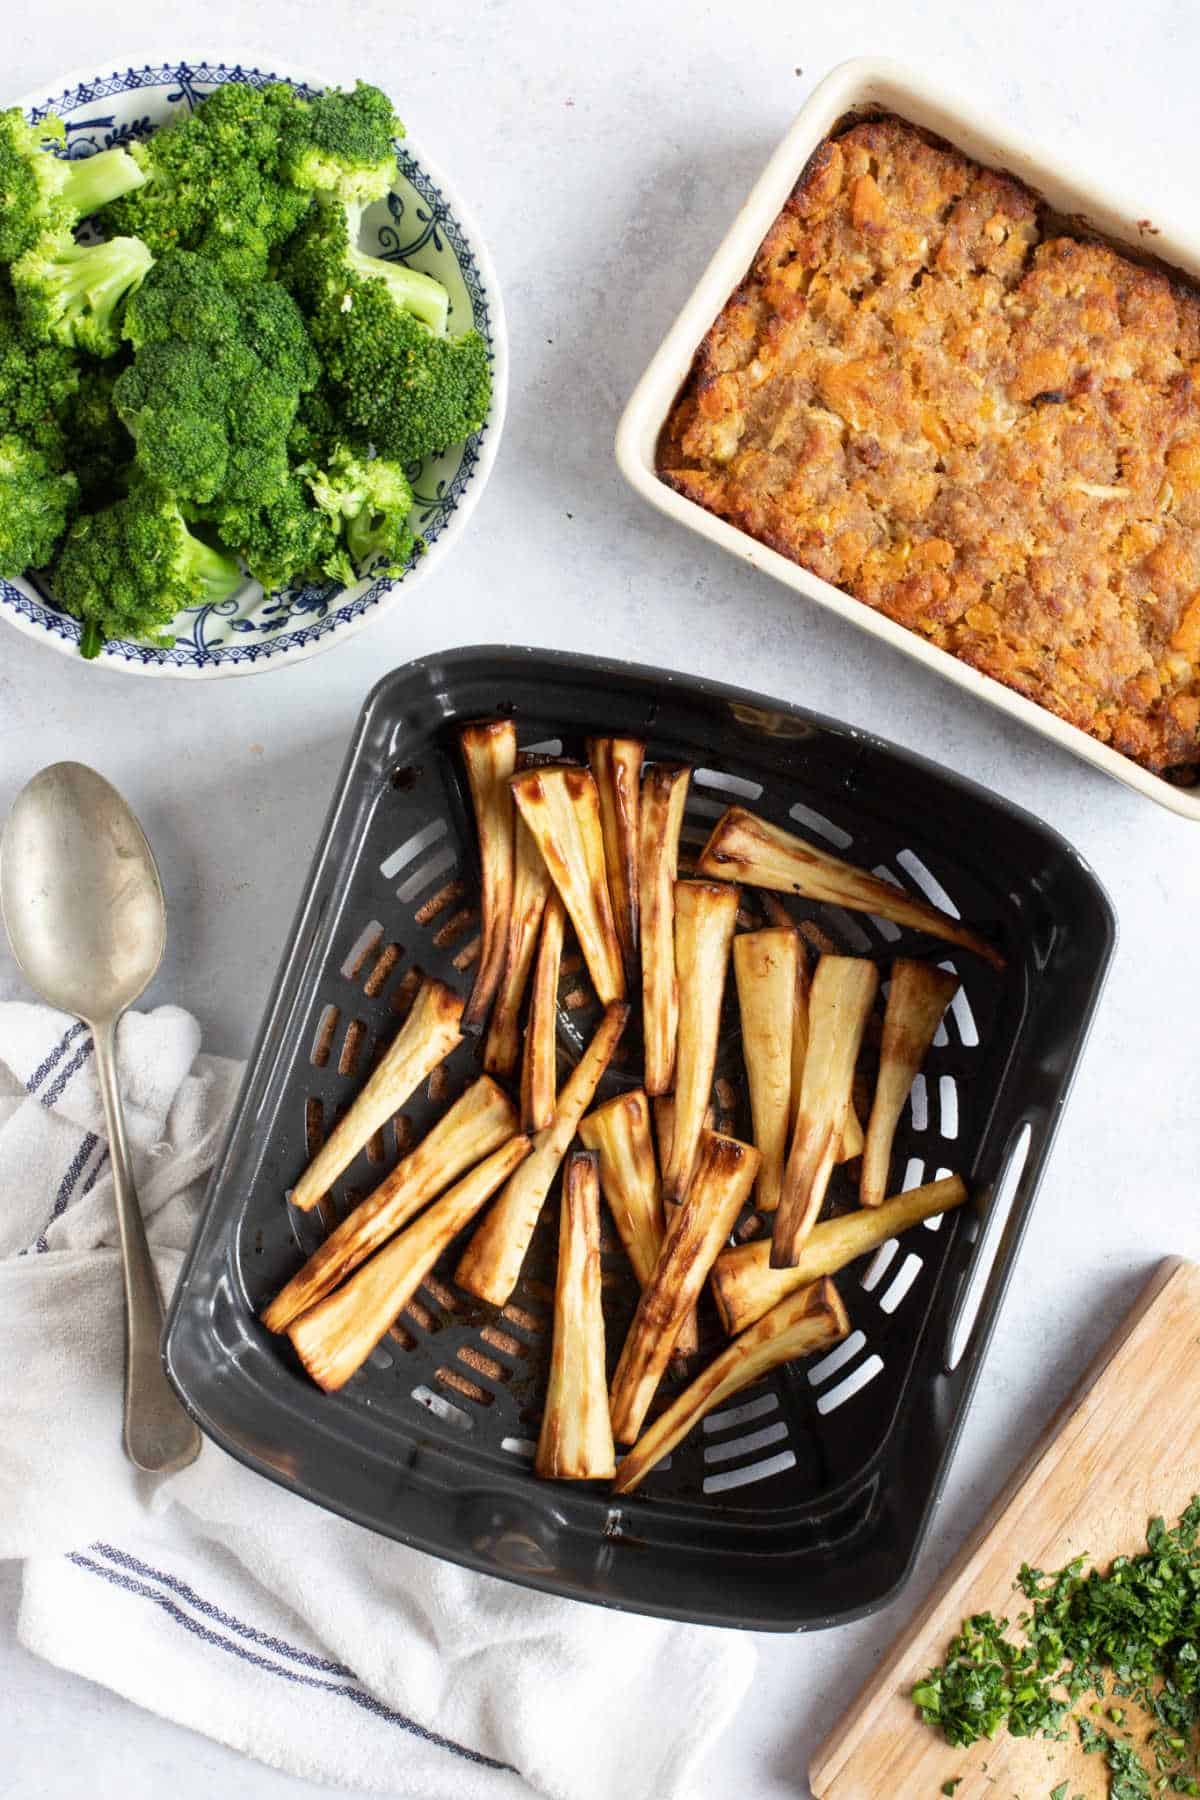 Roast parsnips in air fryer basket with broccoli and stuffing on the side.